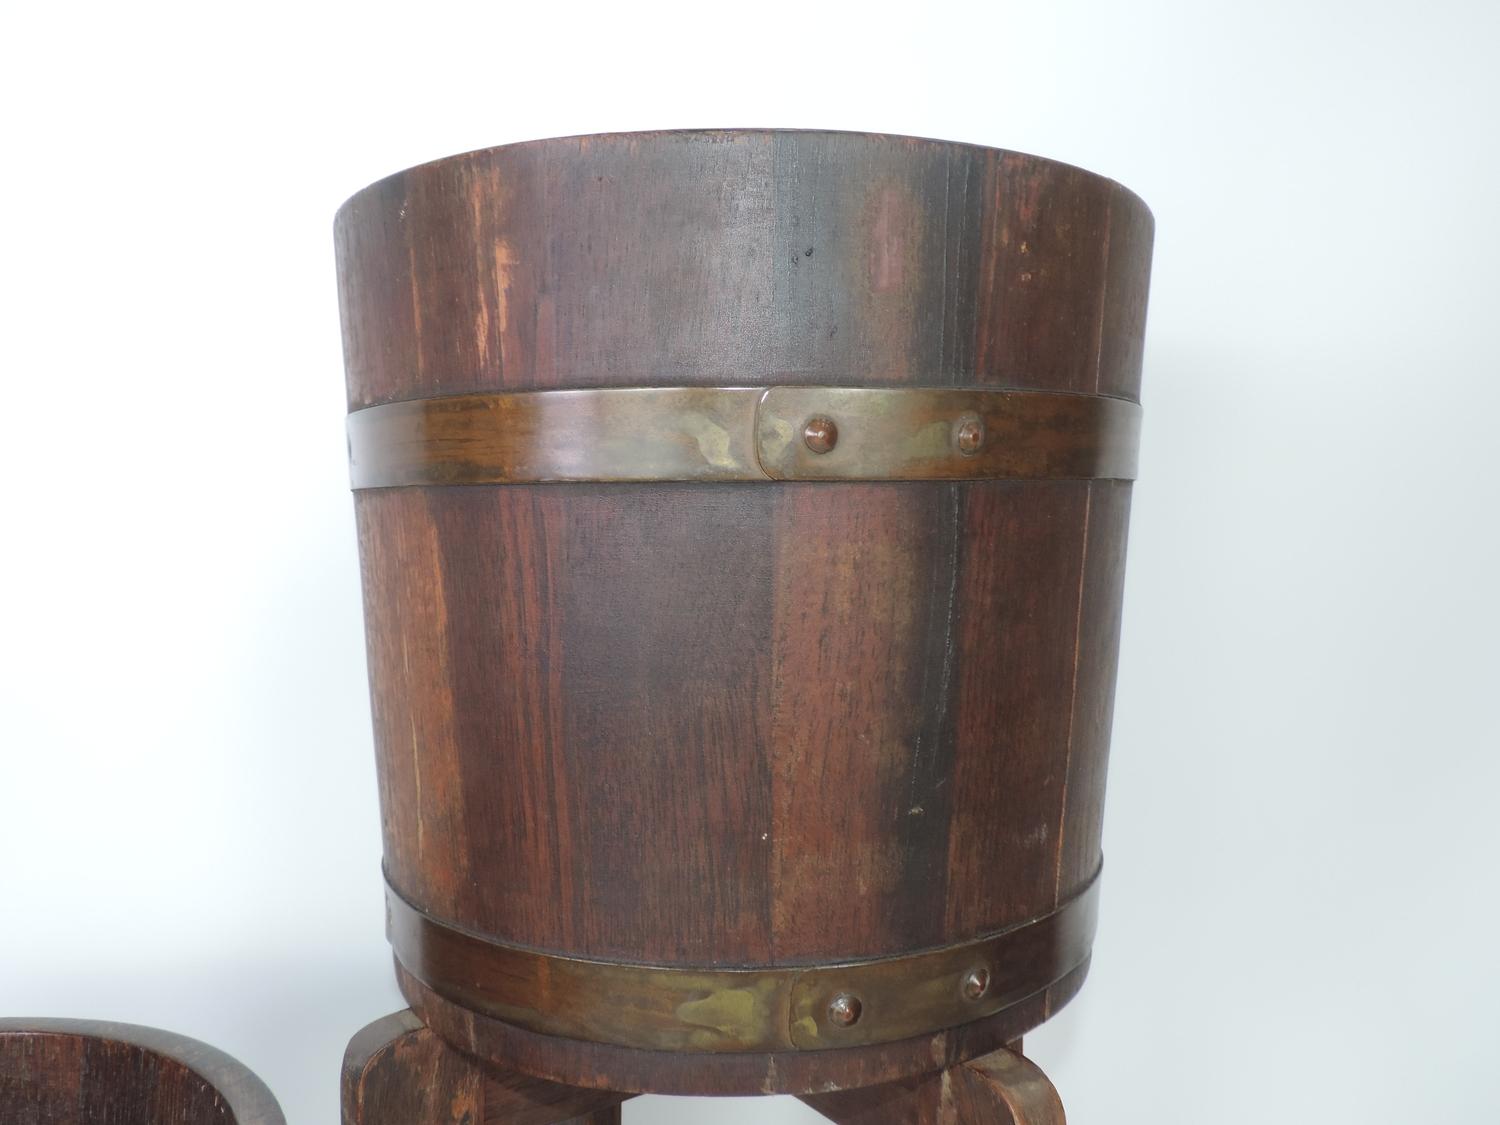 2x Coopered Wooden Planters By R A lister & Co on Stands - Image 2 of 4